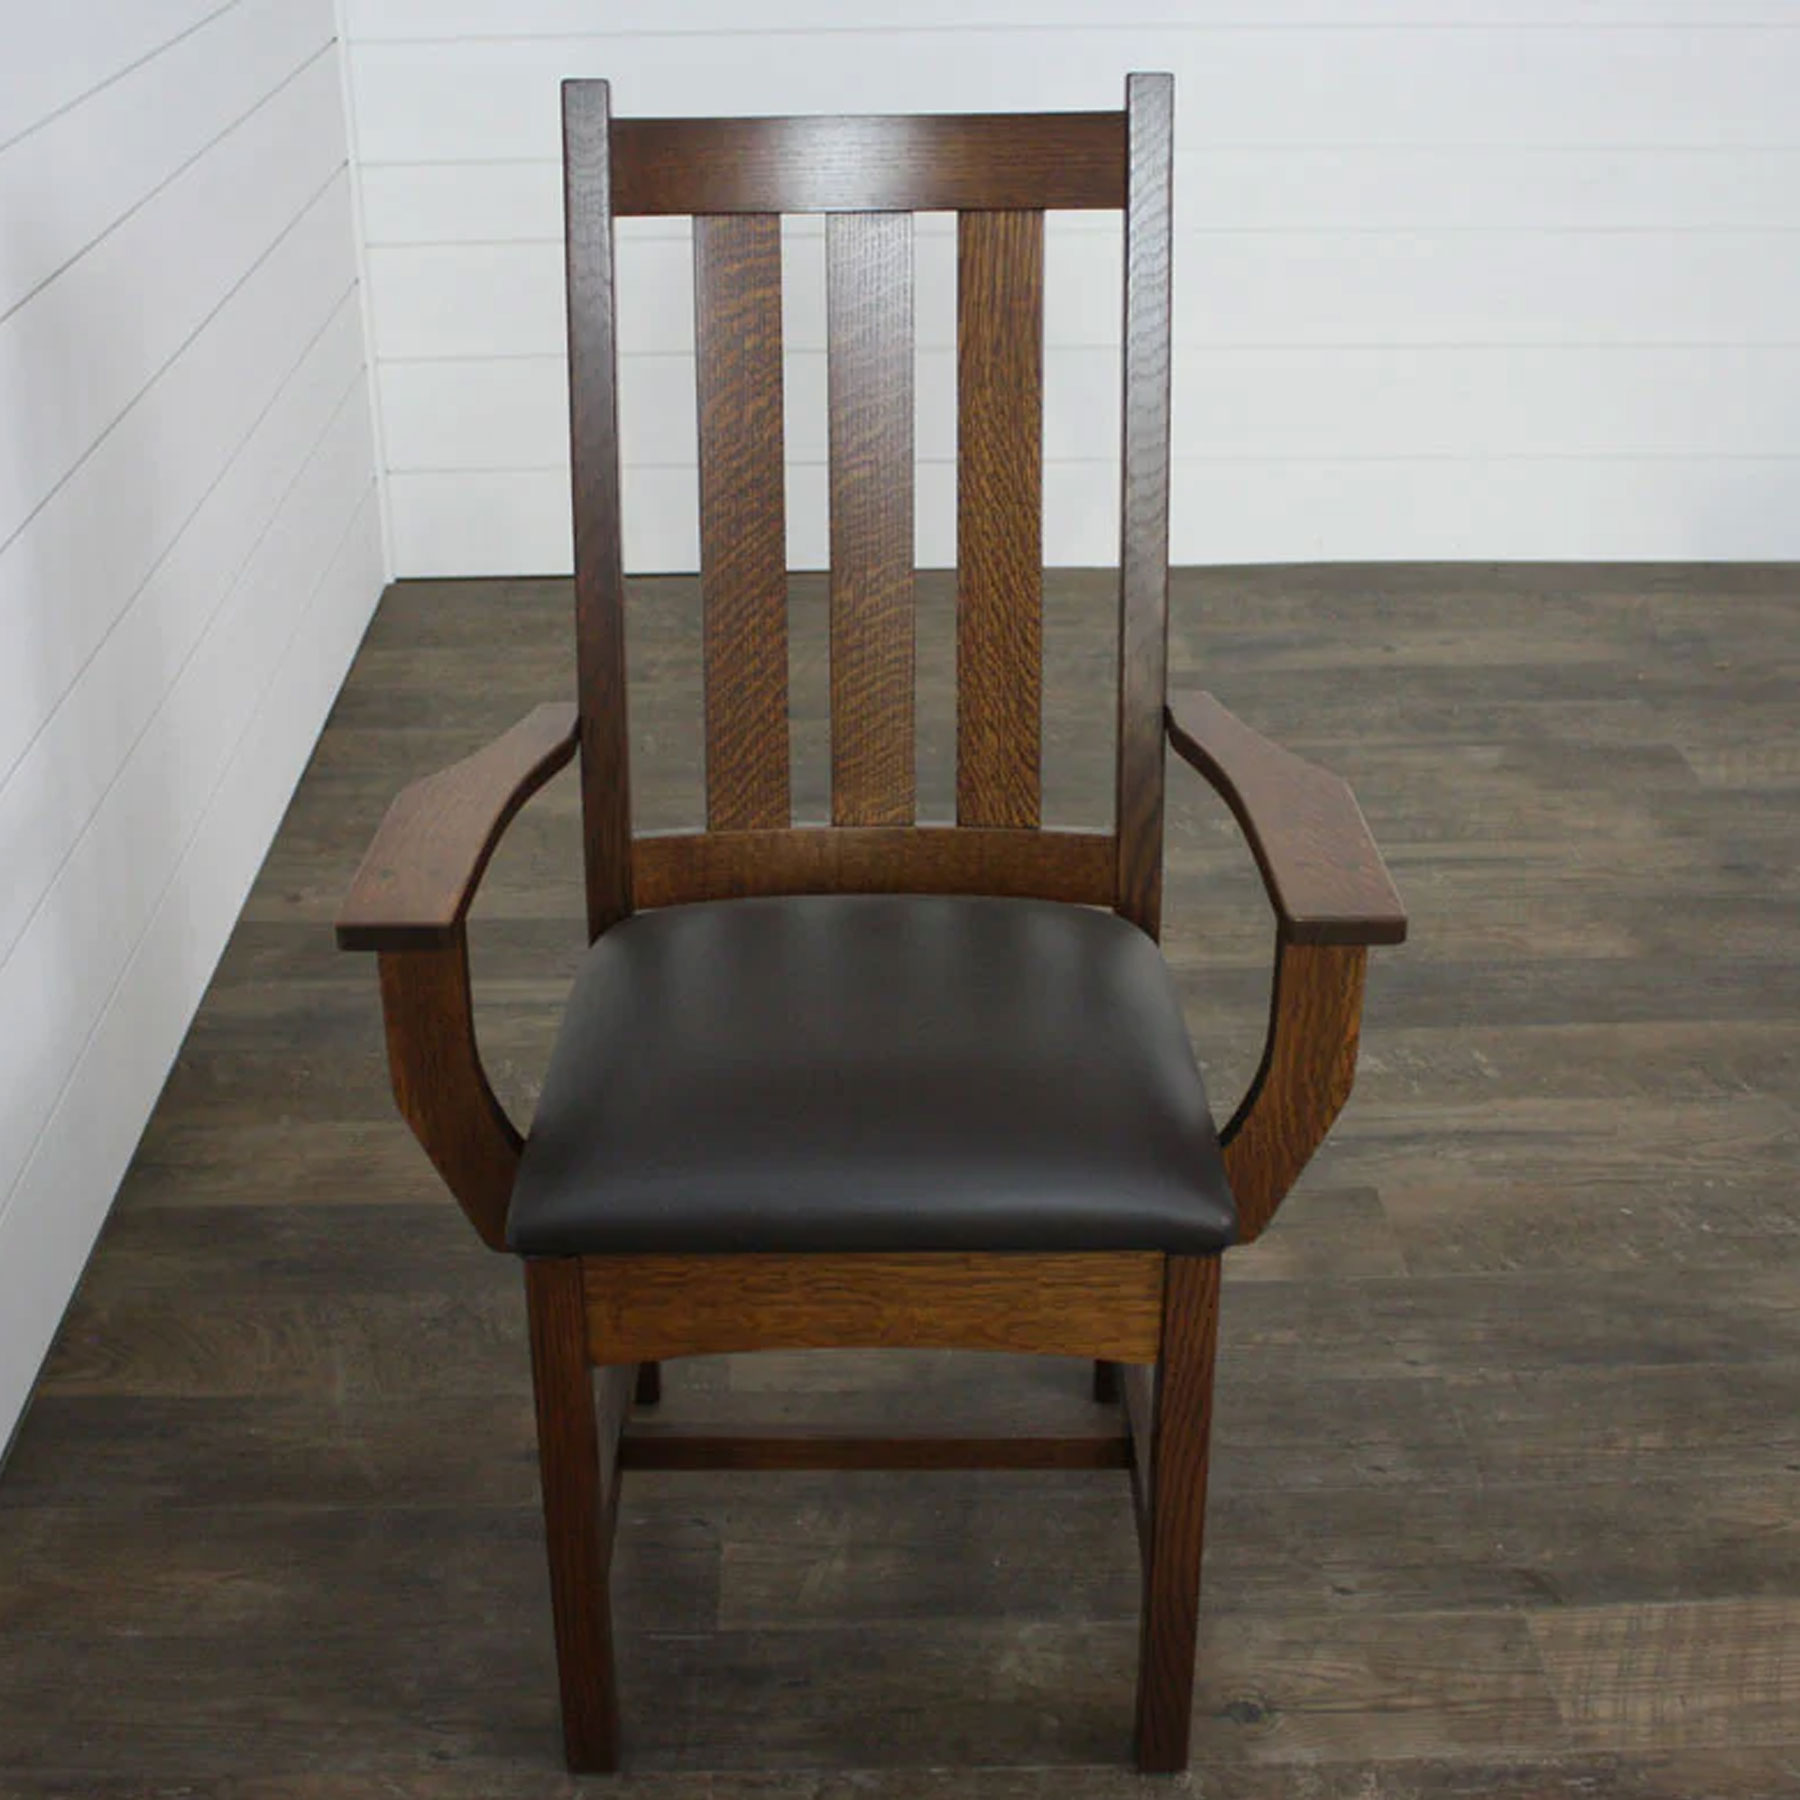 Craftsman Arm Chair with Leather Seat in Quartersawn White Oak